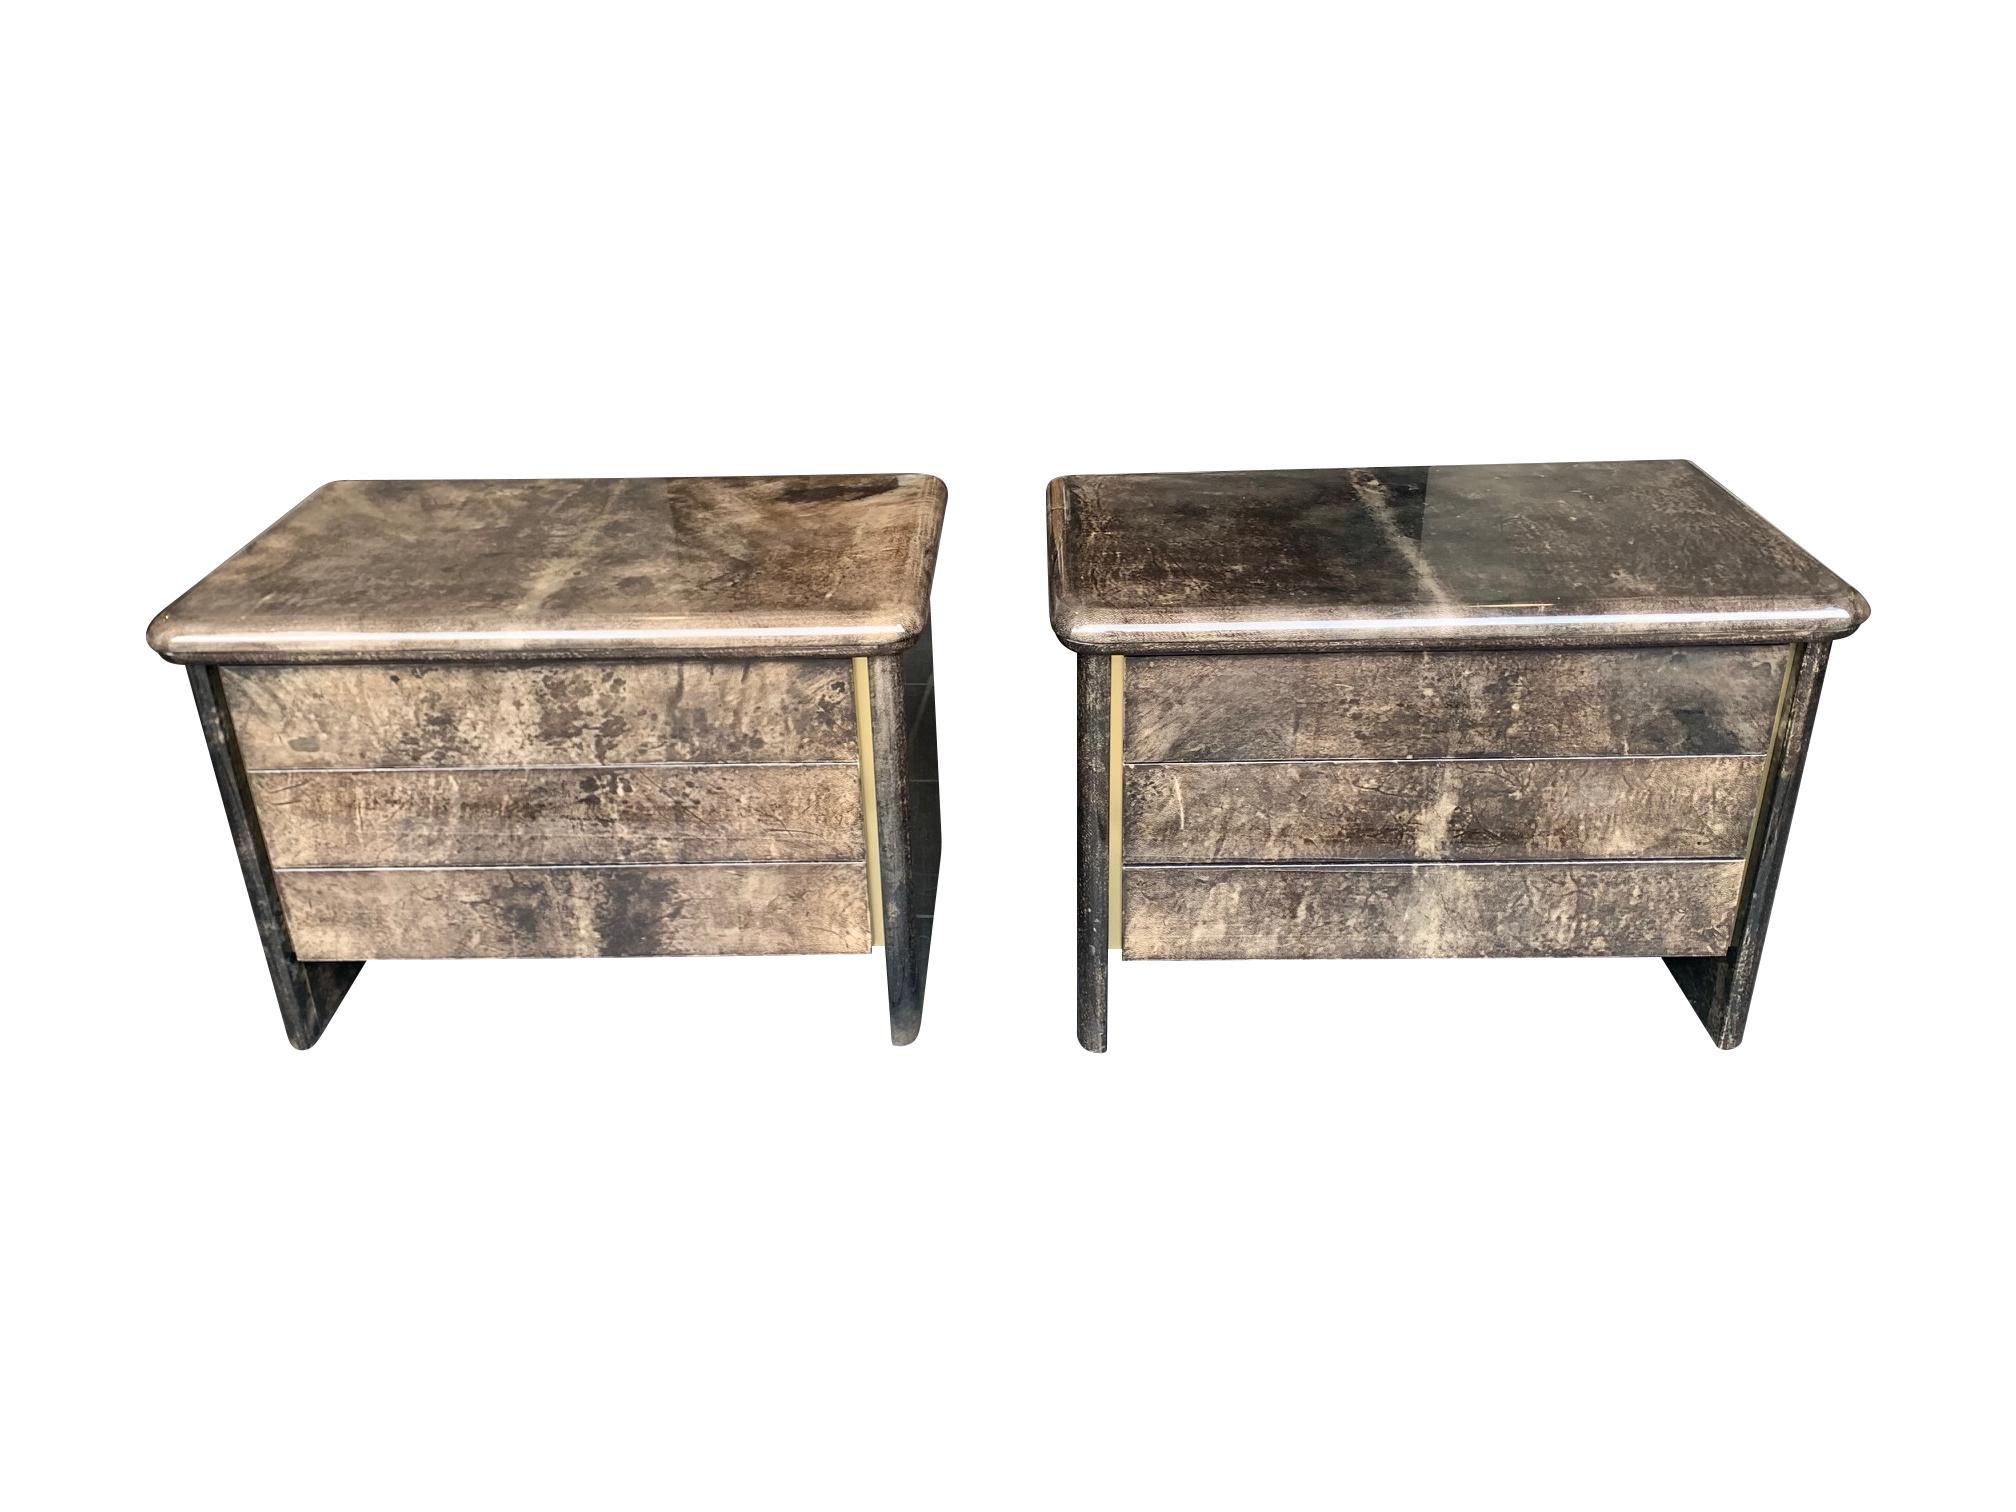 A lovely pair of 1970s grey lacquered goatskin bedside cabinets in the style of Aldo Tura.
Each cabinet has three drawers all with turquoise coloured solid wooden interiors. The quality and condition of the cabinets is very good as these came from